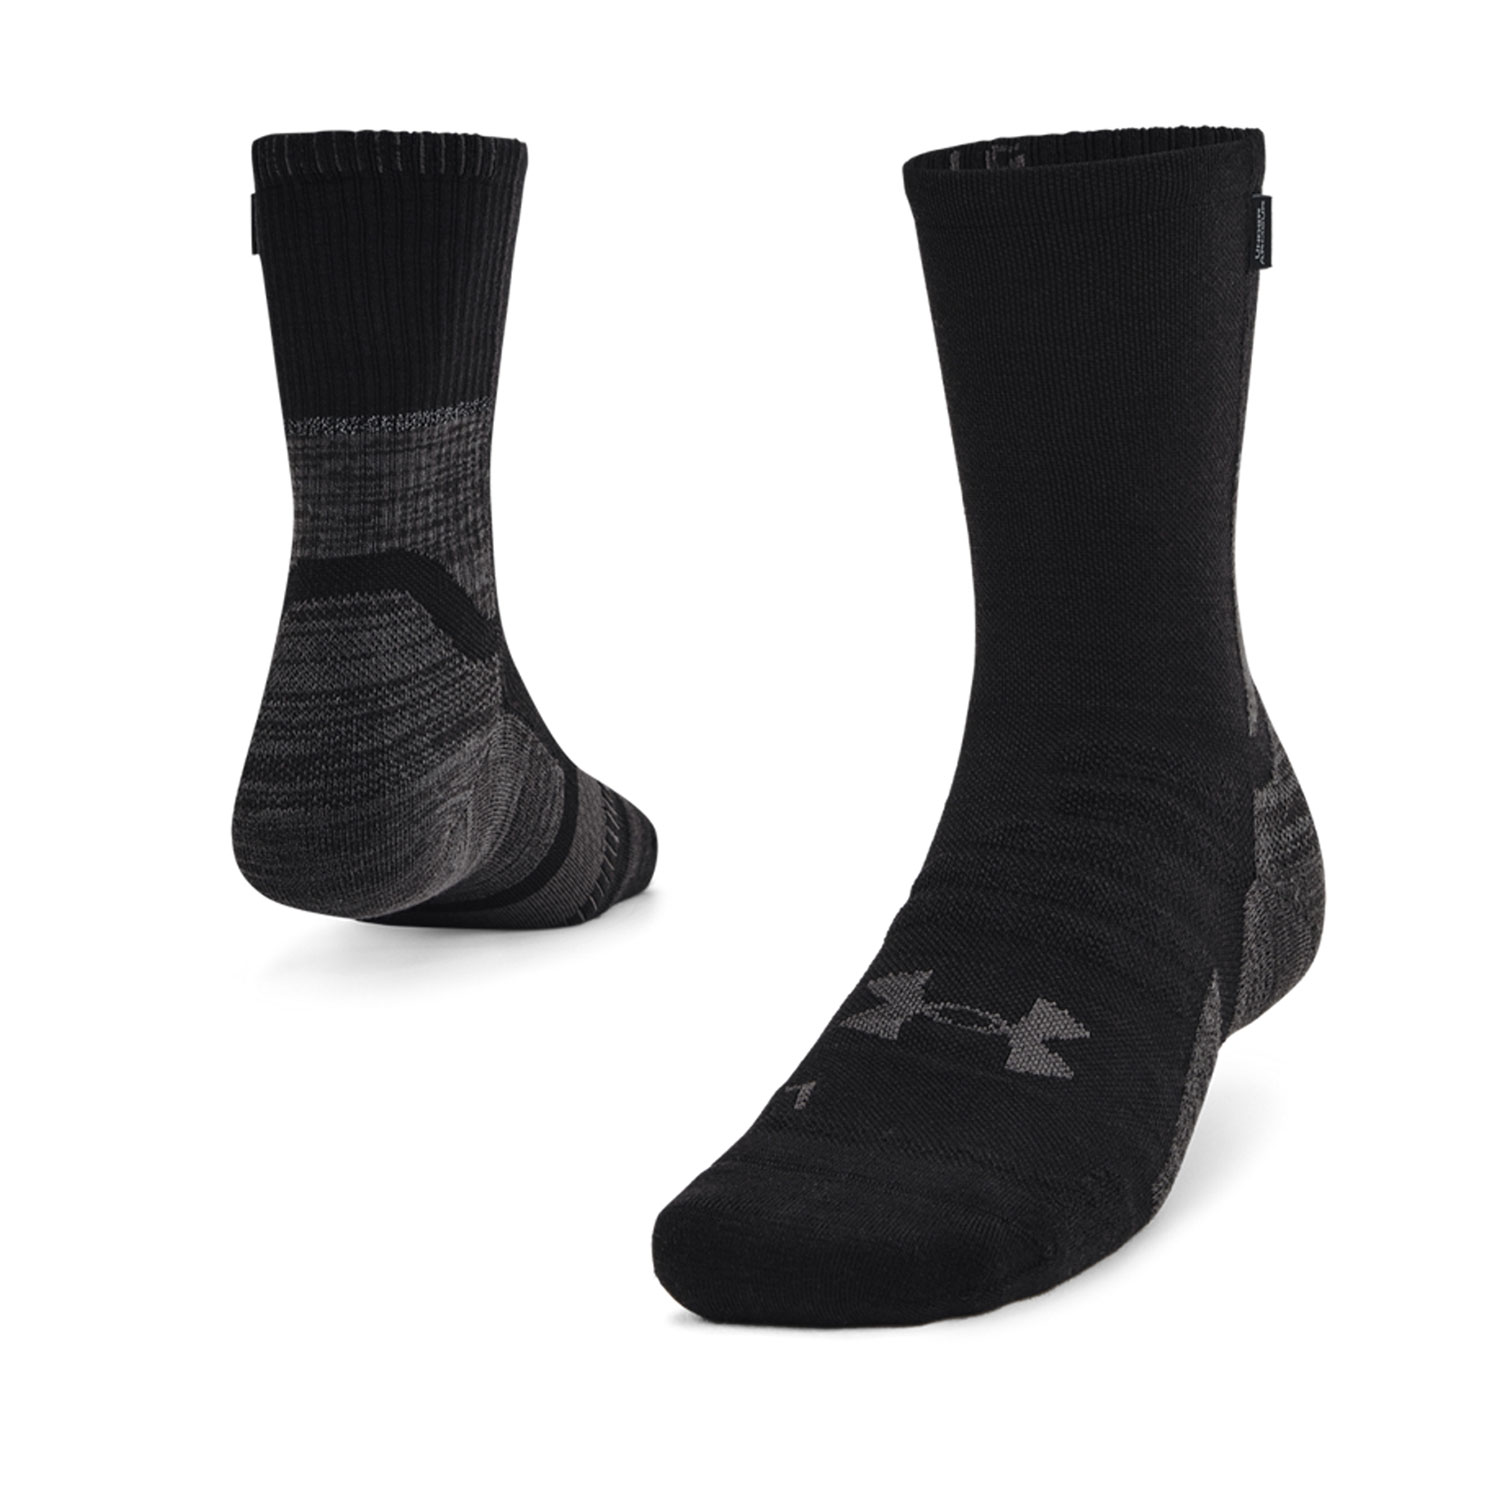 Under Armour Armourdry Calcetines - Black/Jet Gray